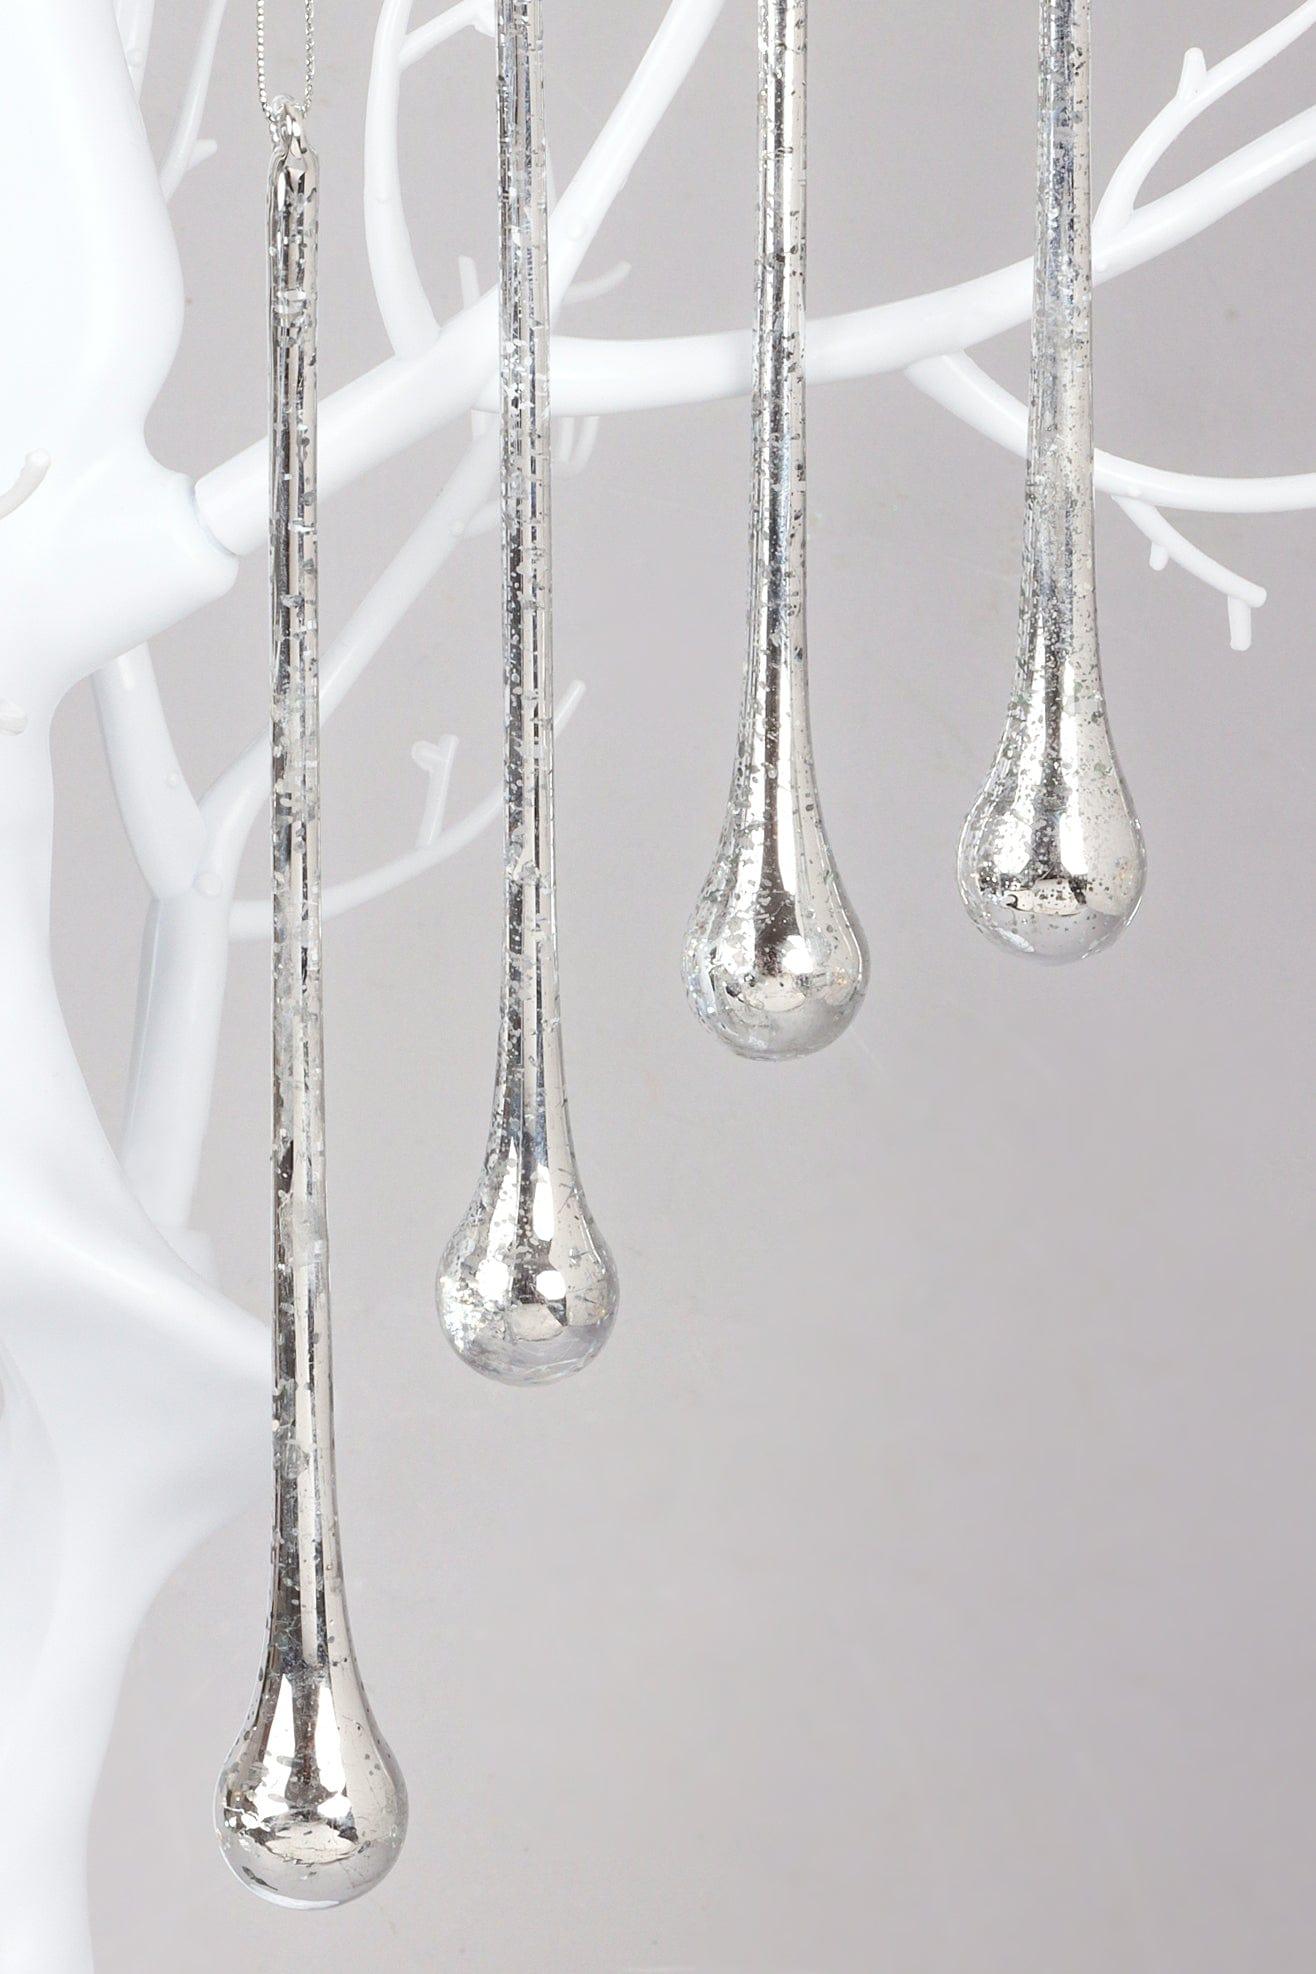 G Decor Christmas Decorations Silver Set of 6 Mottled Silver Glass Long Droplets